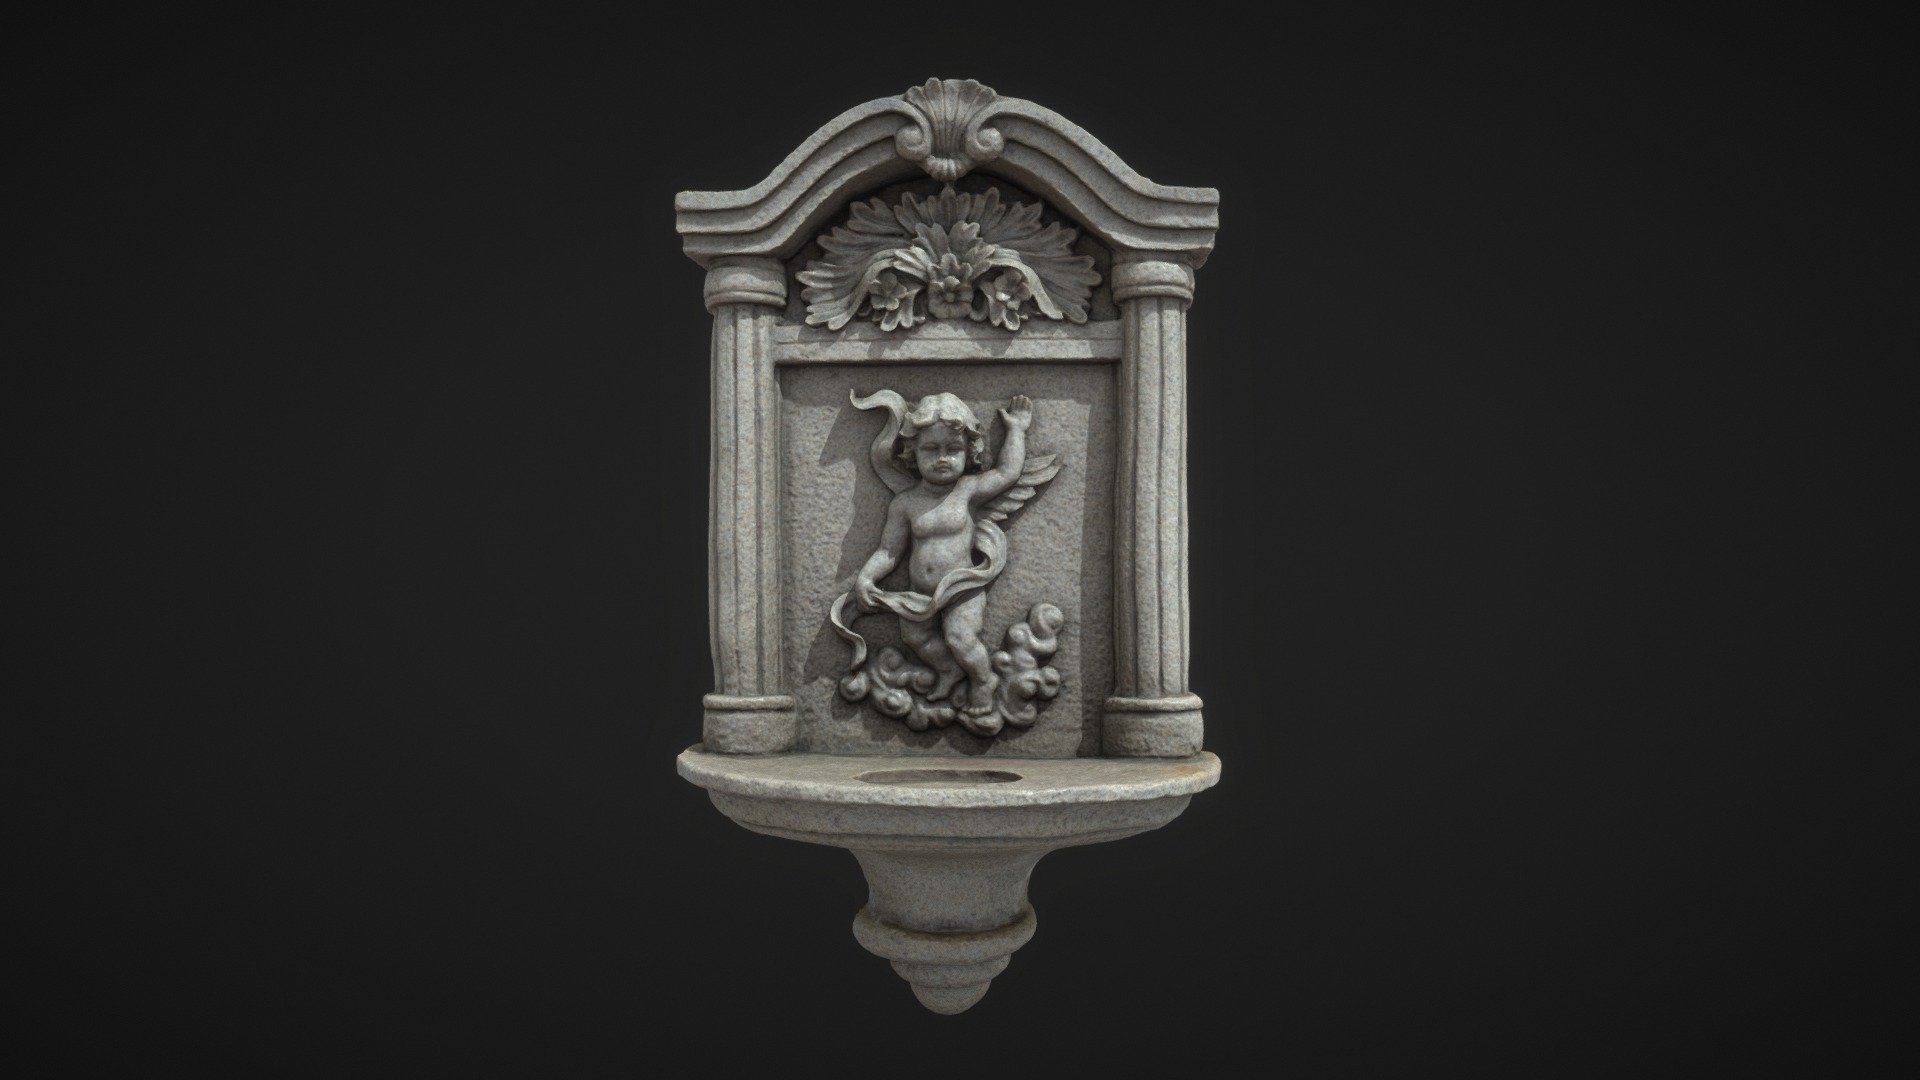 Angel Wall Ornament found at a thrift store. Scanned with Canon T5i / Genie mini ii, captured with Reality capture, edited in medium, modo, and substance - Angel Wall Ornament - Buy Royalty Free 3D model by StudioNexus (@cynex) 3d model